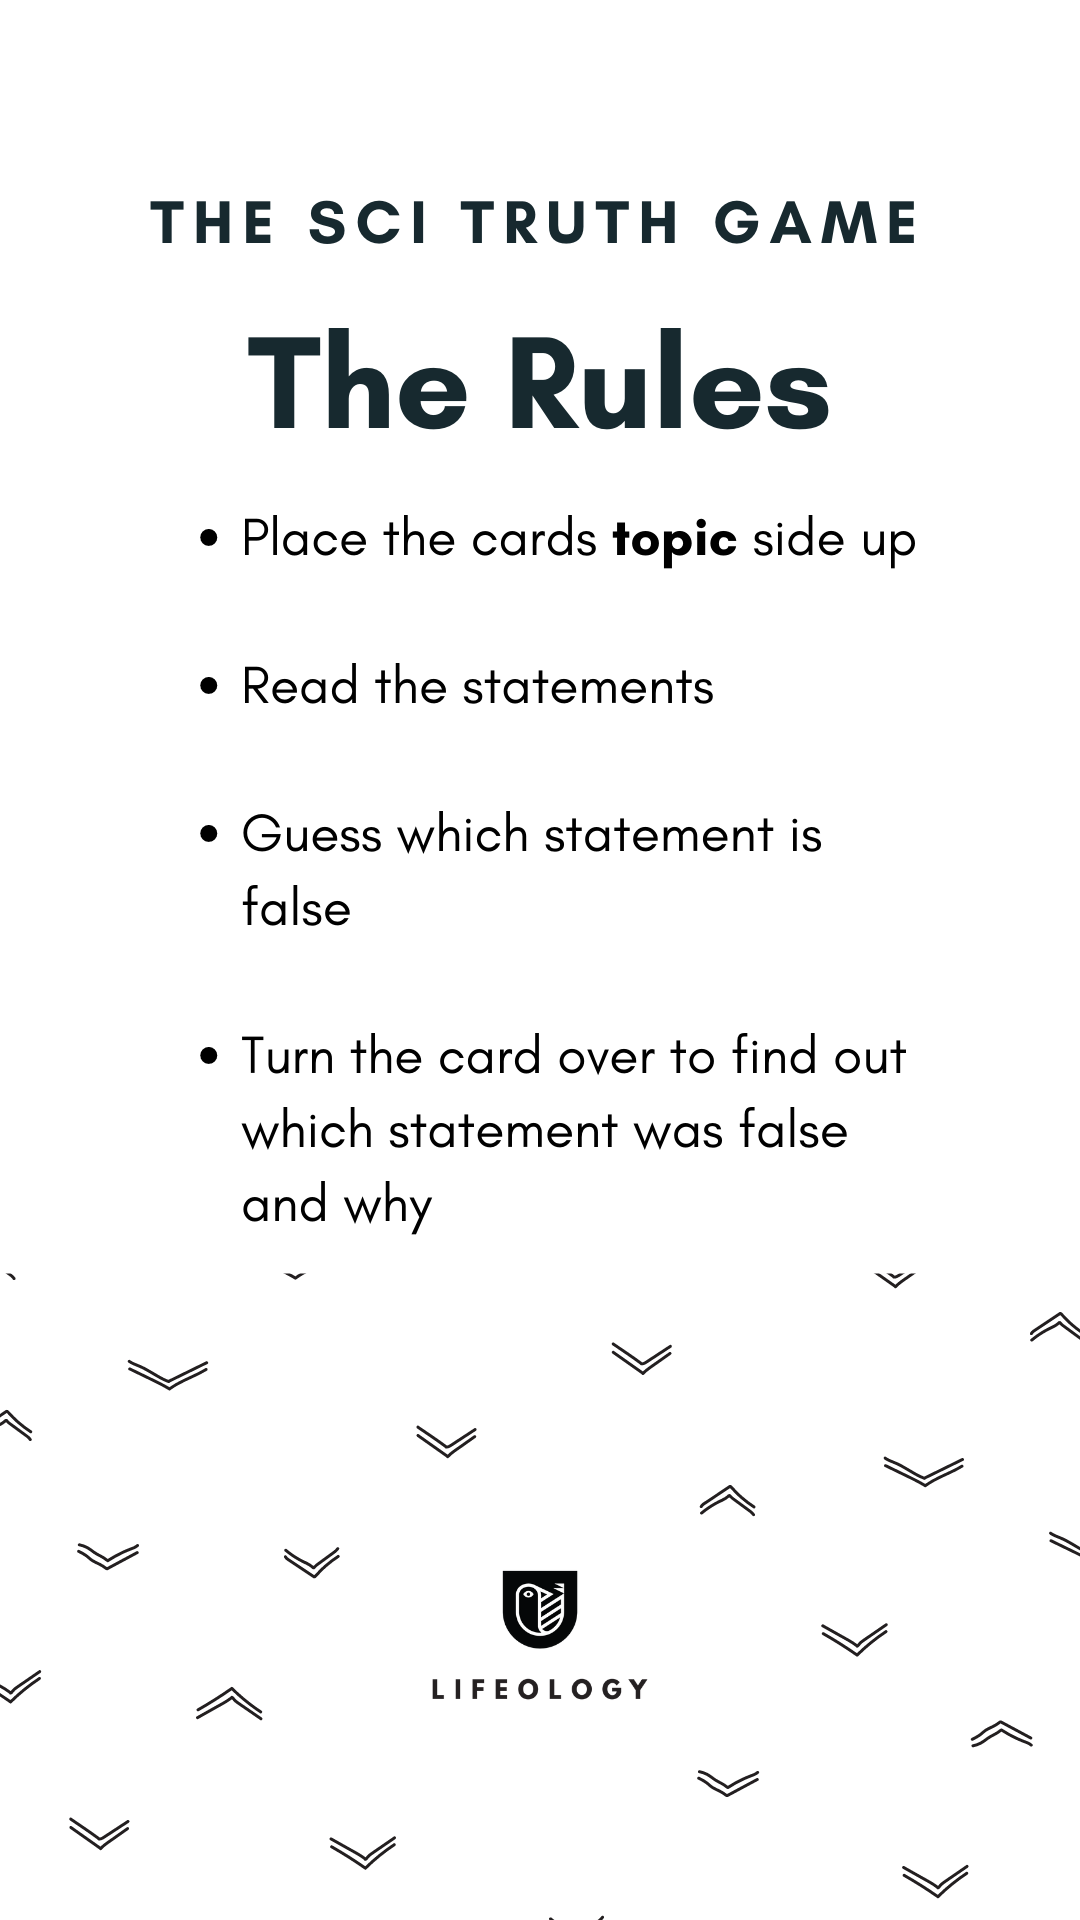 The Sci Truth Game Rules Card- Place the cards topic side up, read the statements, guess which is false and turn over the card to reveal the correct answer and an explanation